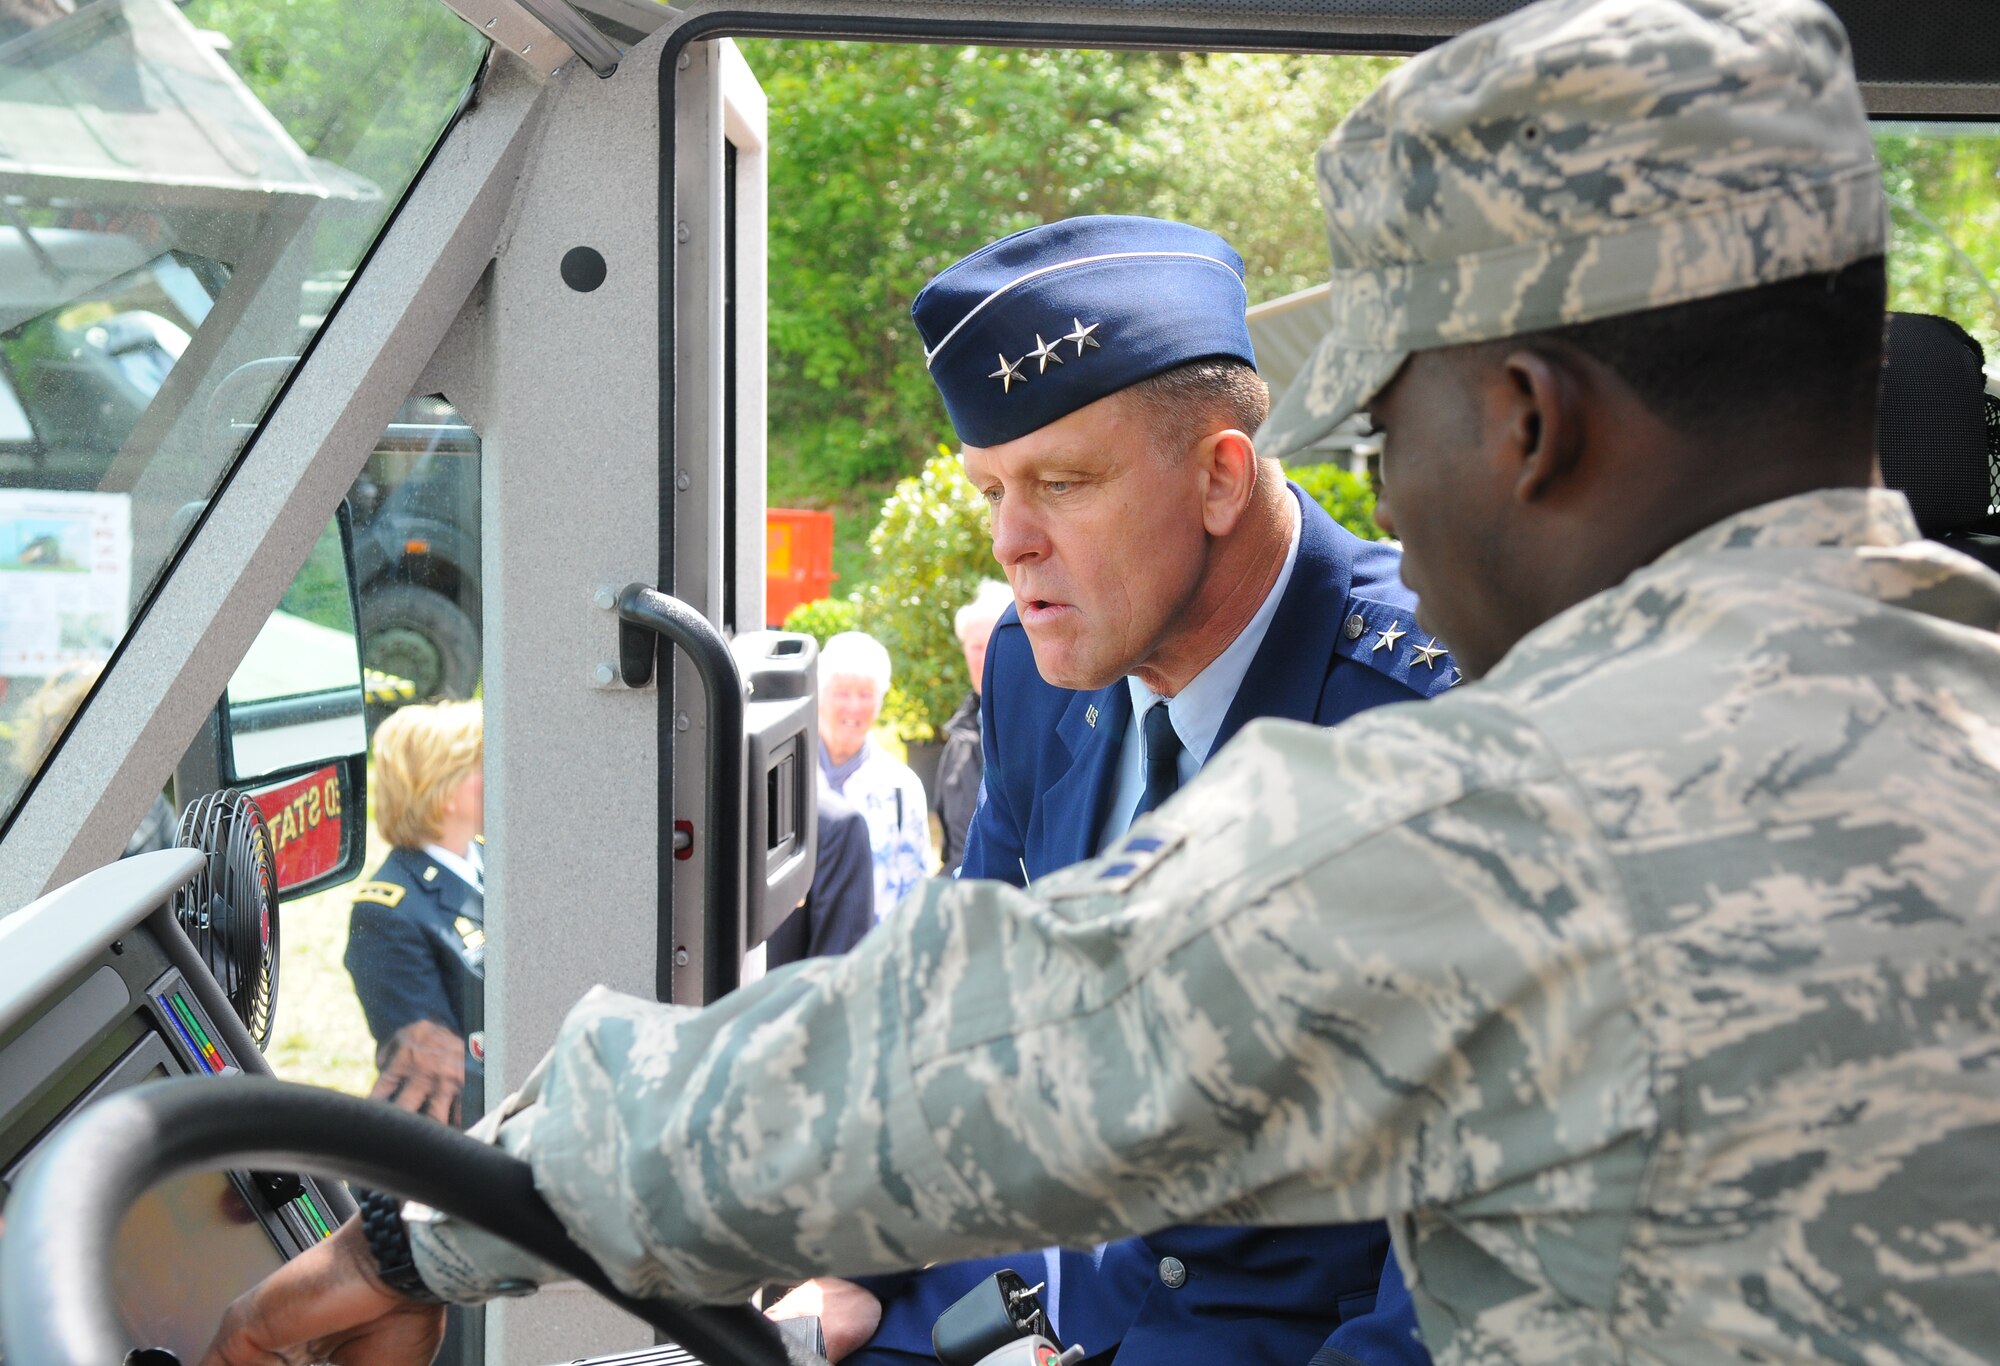 PRUEM, Germany – Airman 1st Class Jodeci Octavis Mitchell, 52nd Civil Engineer Squadron firefighter, shows Lt. Gen. Frank Gorenc, 3rd Air Force commander, how a robotic fire hose is operated from within the cab of the vehicle during the Rheinland-Pfalz Day Fair in Pruem, Germany, May 28. The Rheinland-Pfalz Day Fair is a three-day festival with entertainment, informational booths and other attractions. (U.S. Air Force photo/Airman 1st Class Dillon Davis)